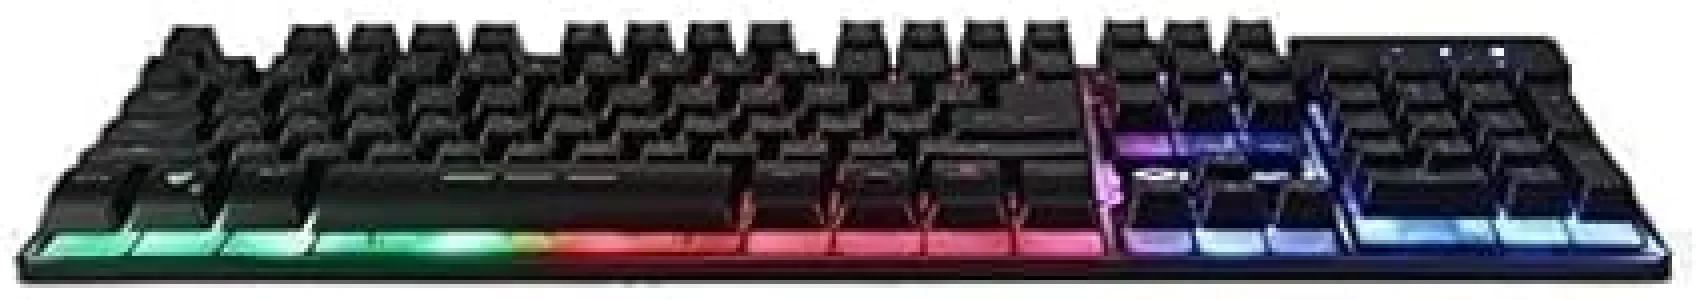 Meetion Store Meetion USB Rainbow Gaming Keyboard For PC & Laptop - K9300